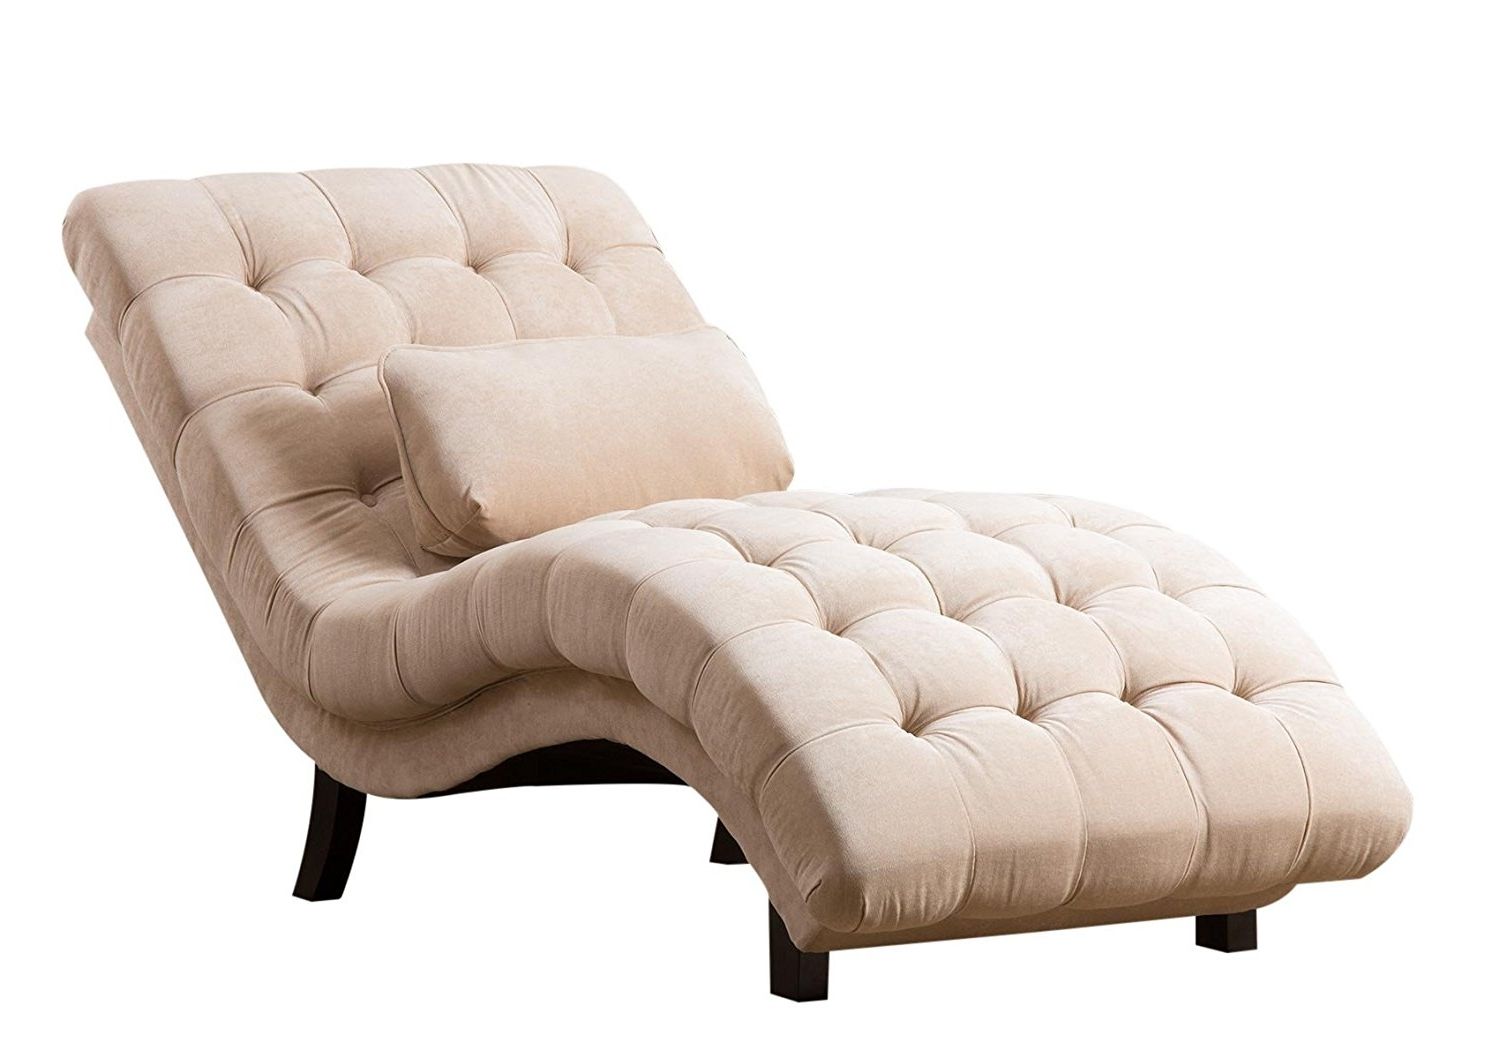 Famous Chaise Chairs Intended For Amazon: Abbyson Carmen Cream Fabric Chaise: Home & Kitchen (View 8 of 15)